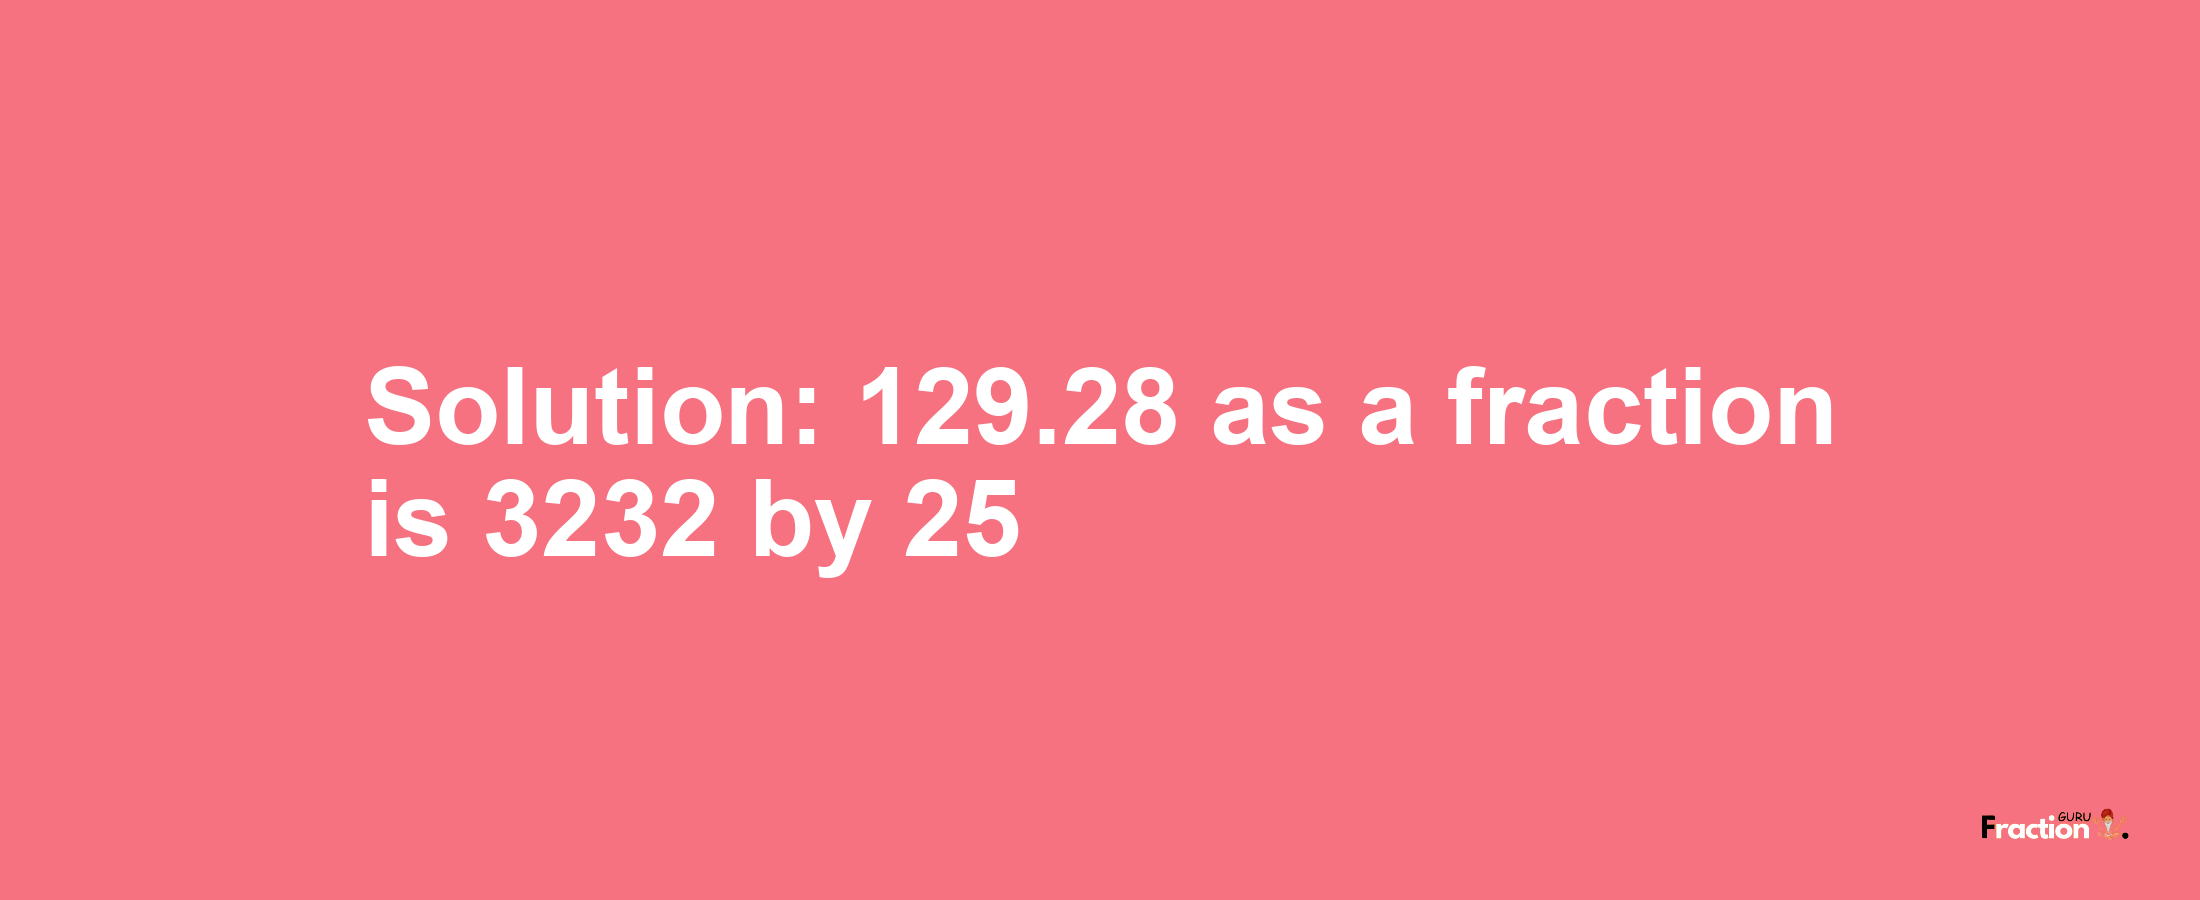 Solution:129.28 as a fraction is 3232/25